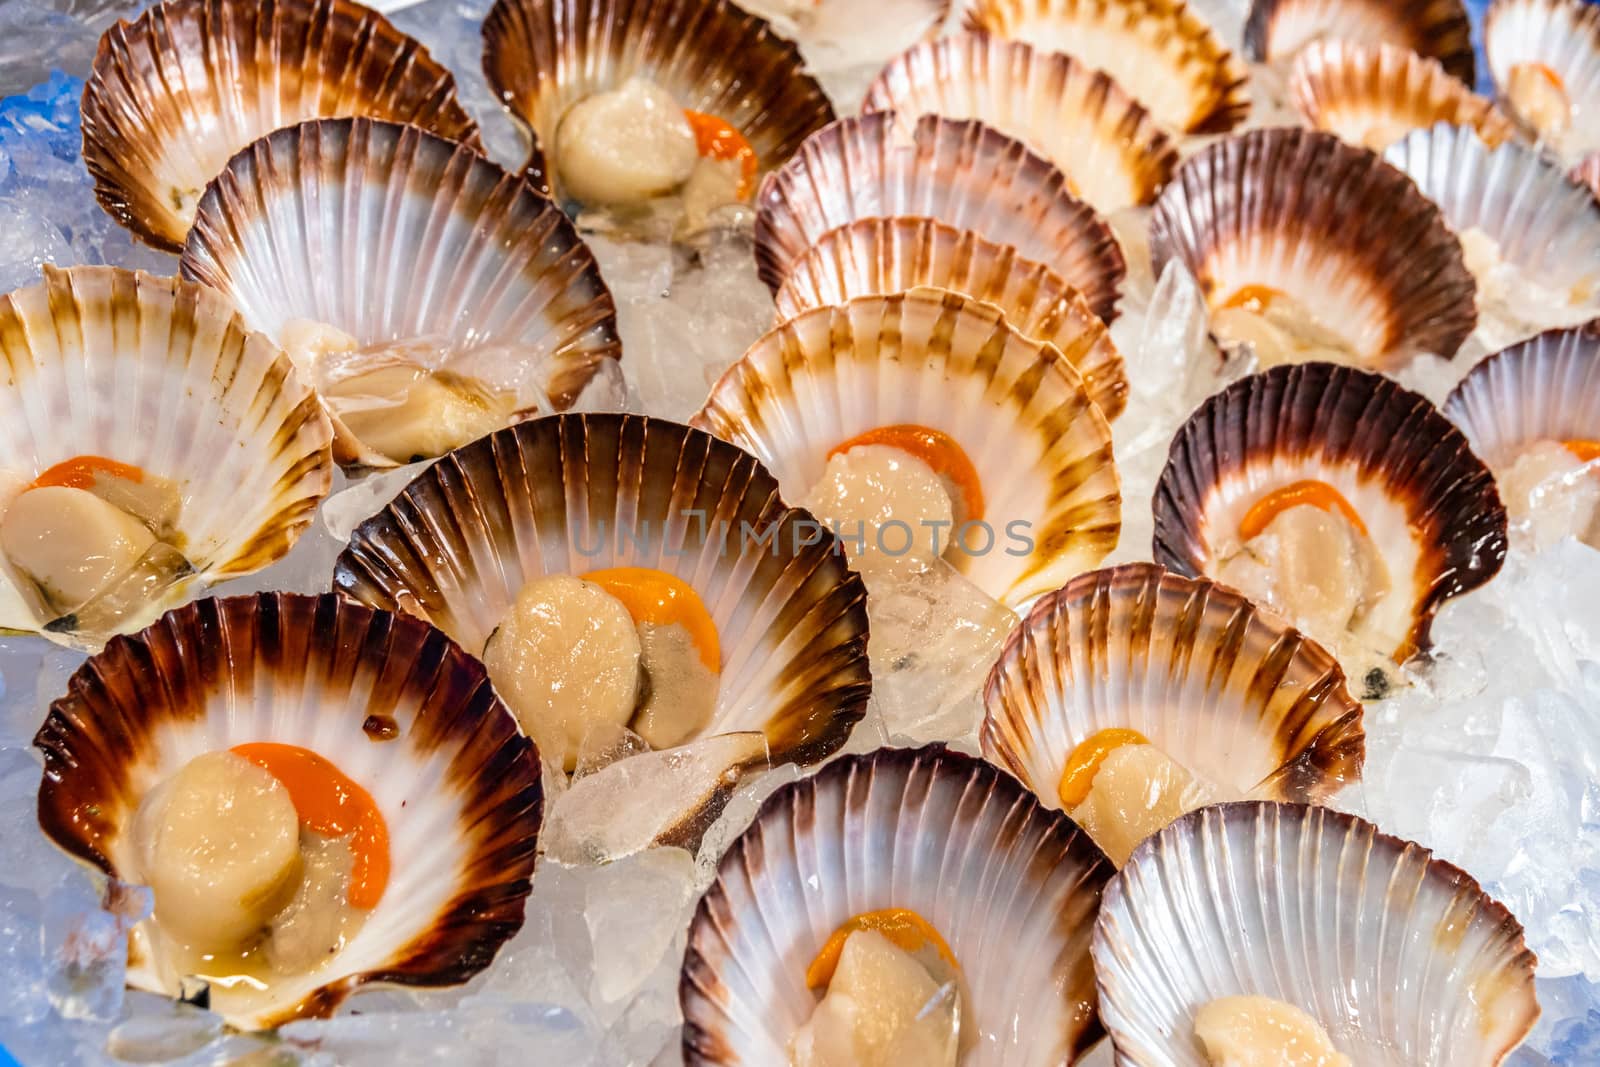 Close-up view of multiple fresh raw scallops on a bed of ice in Sydney fish market